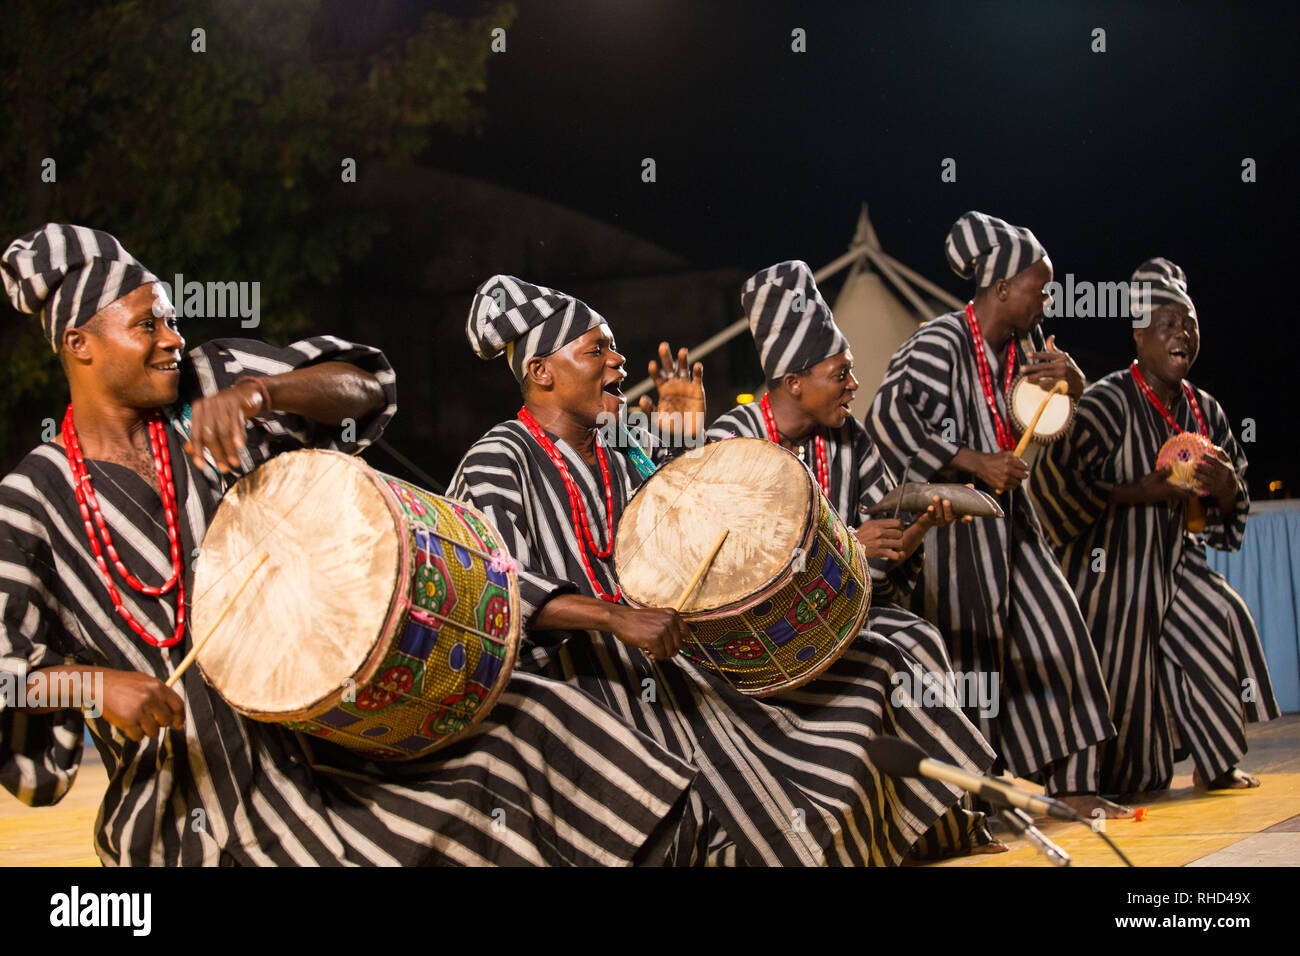 Gorizia, Italy - August 26, 2017: Drumers of Benin traditional dance company in the town street during the International Folklore festival Stock Photo